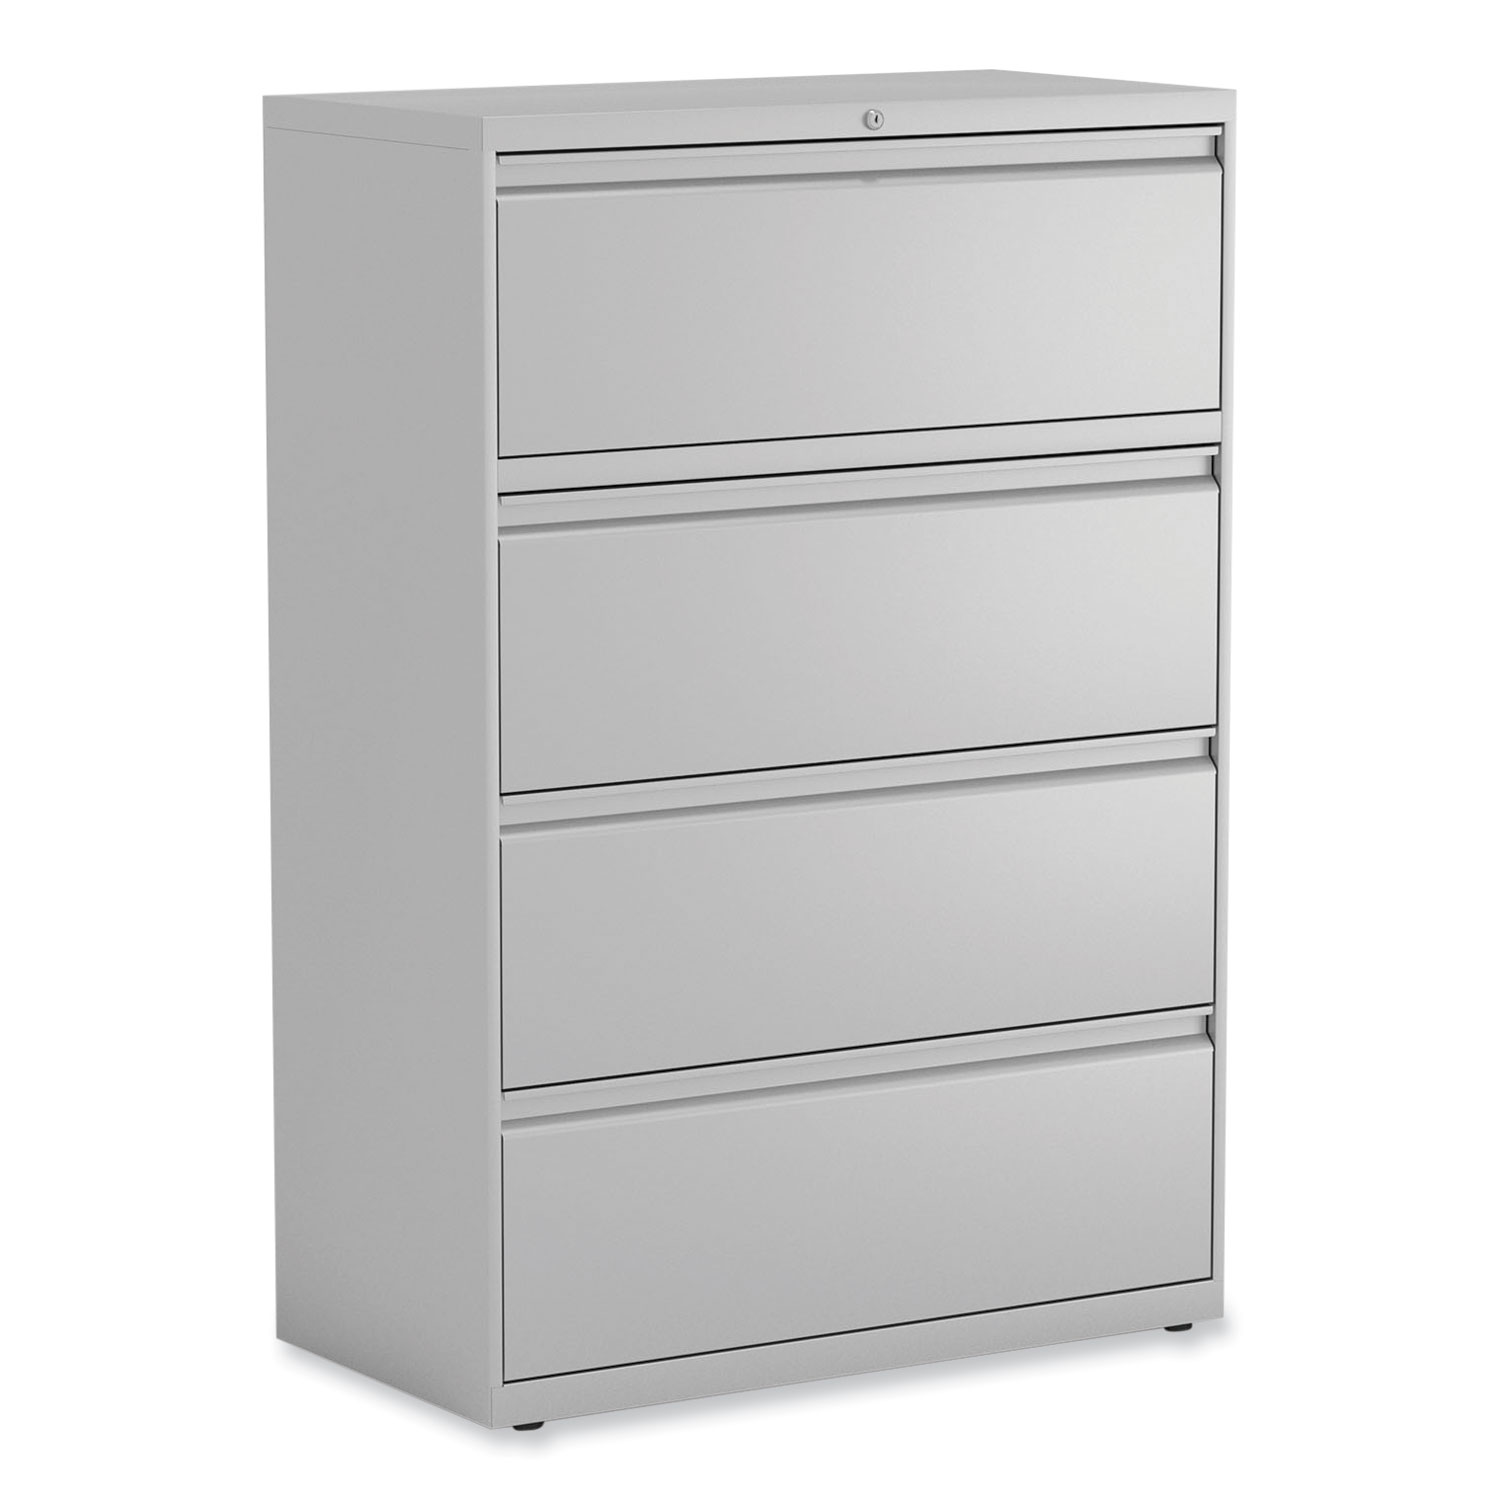 Alera Lateral File, 4 Legal/Letter-Size File Drawers, Light Gray, 36" x 18.63" x 52.5" - image 1 of 7